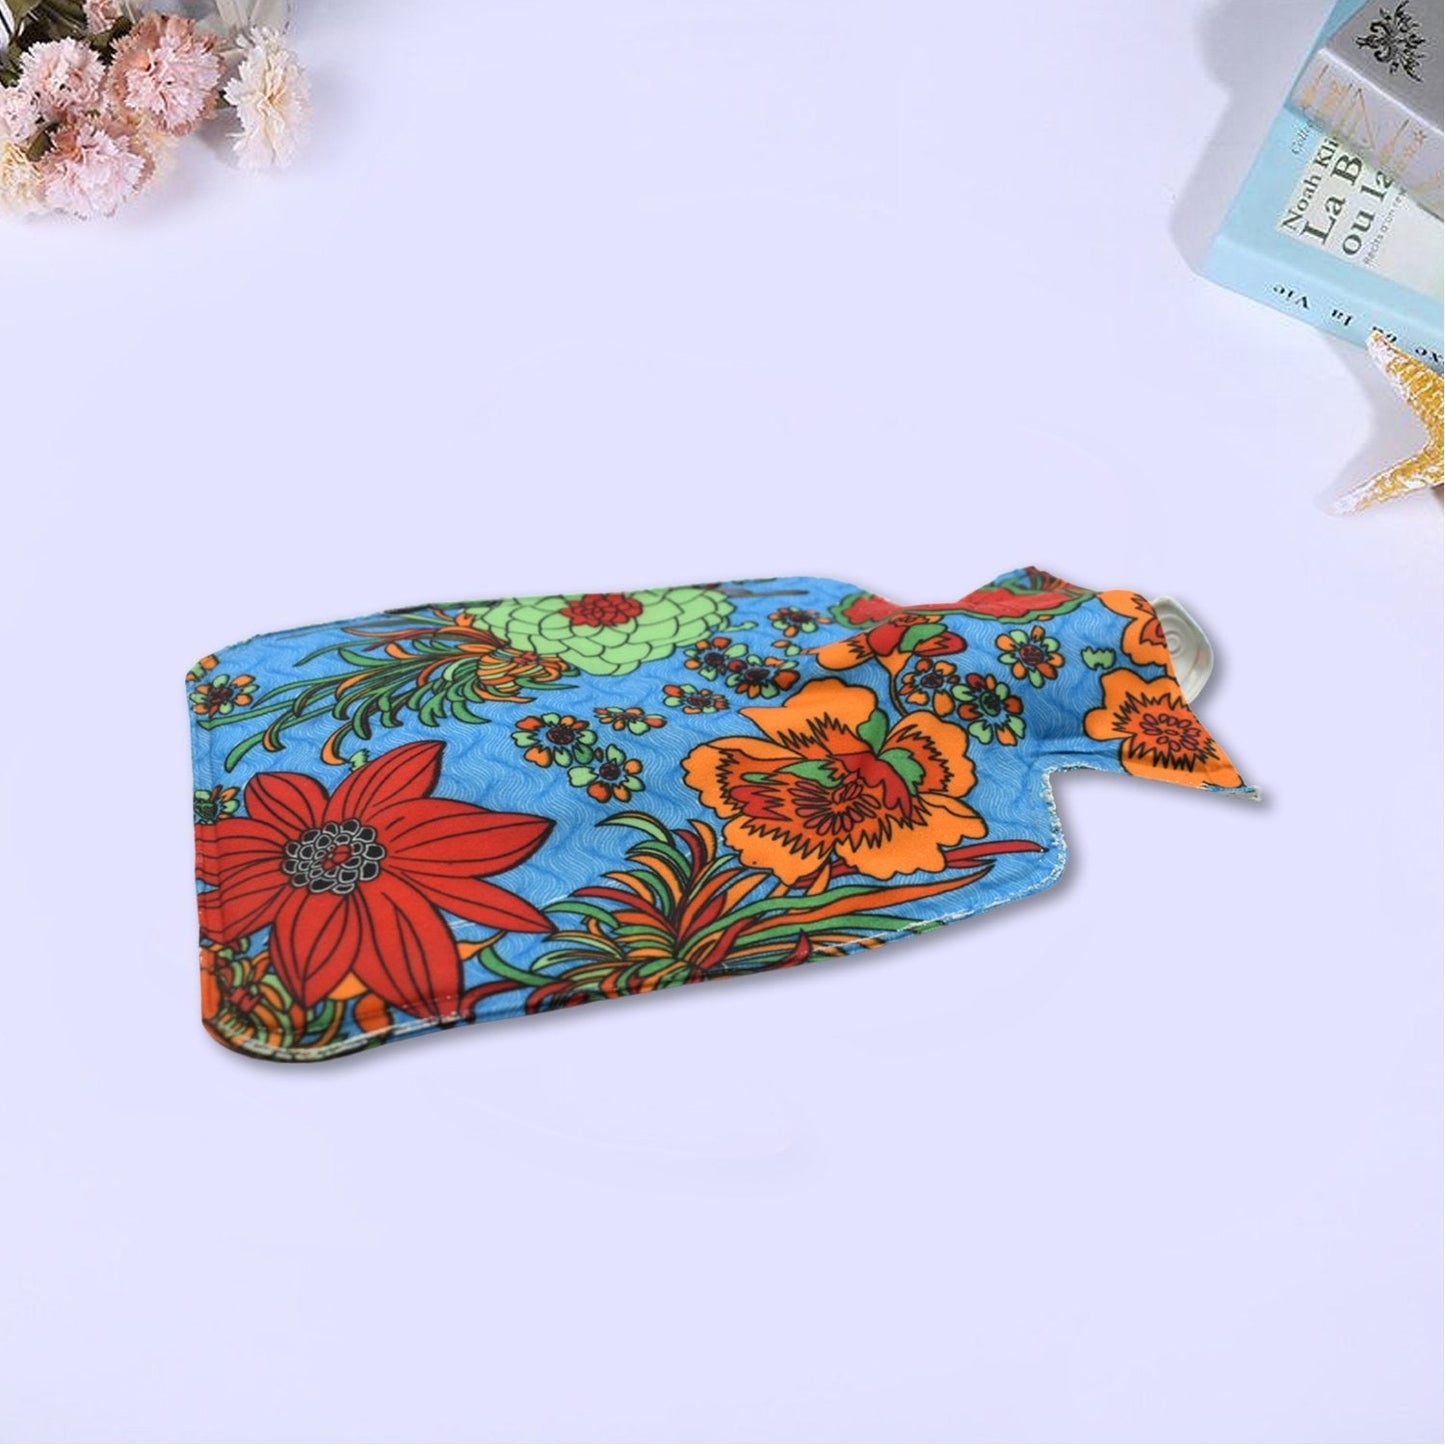 Personal Care Rubber Hot Water Heating Pad Bag for Pain Relief